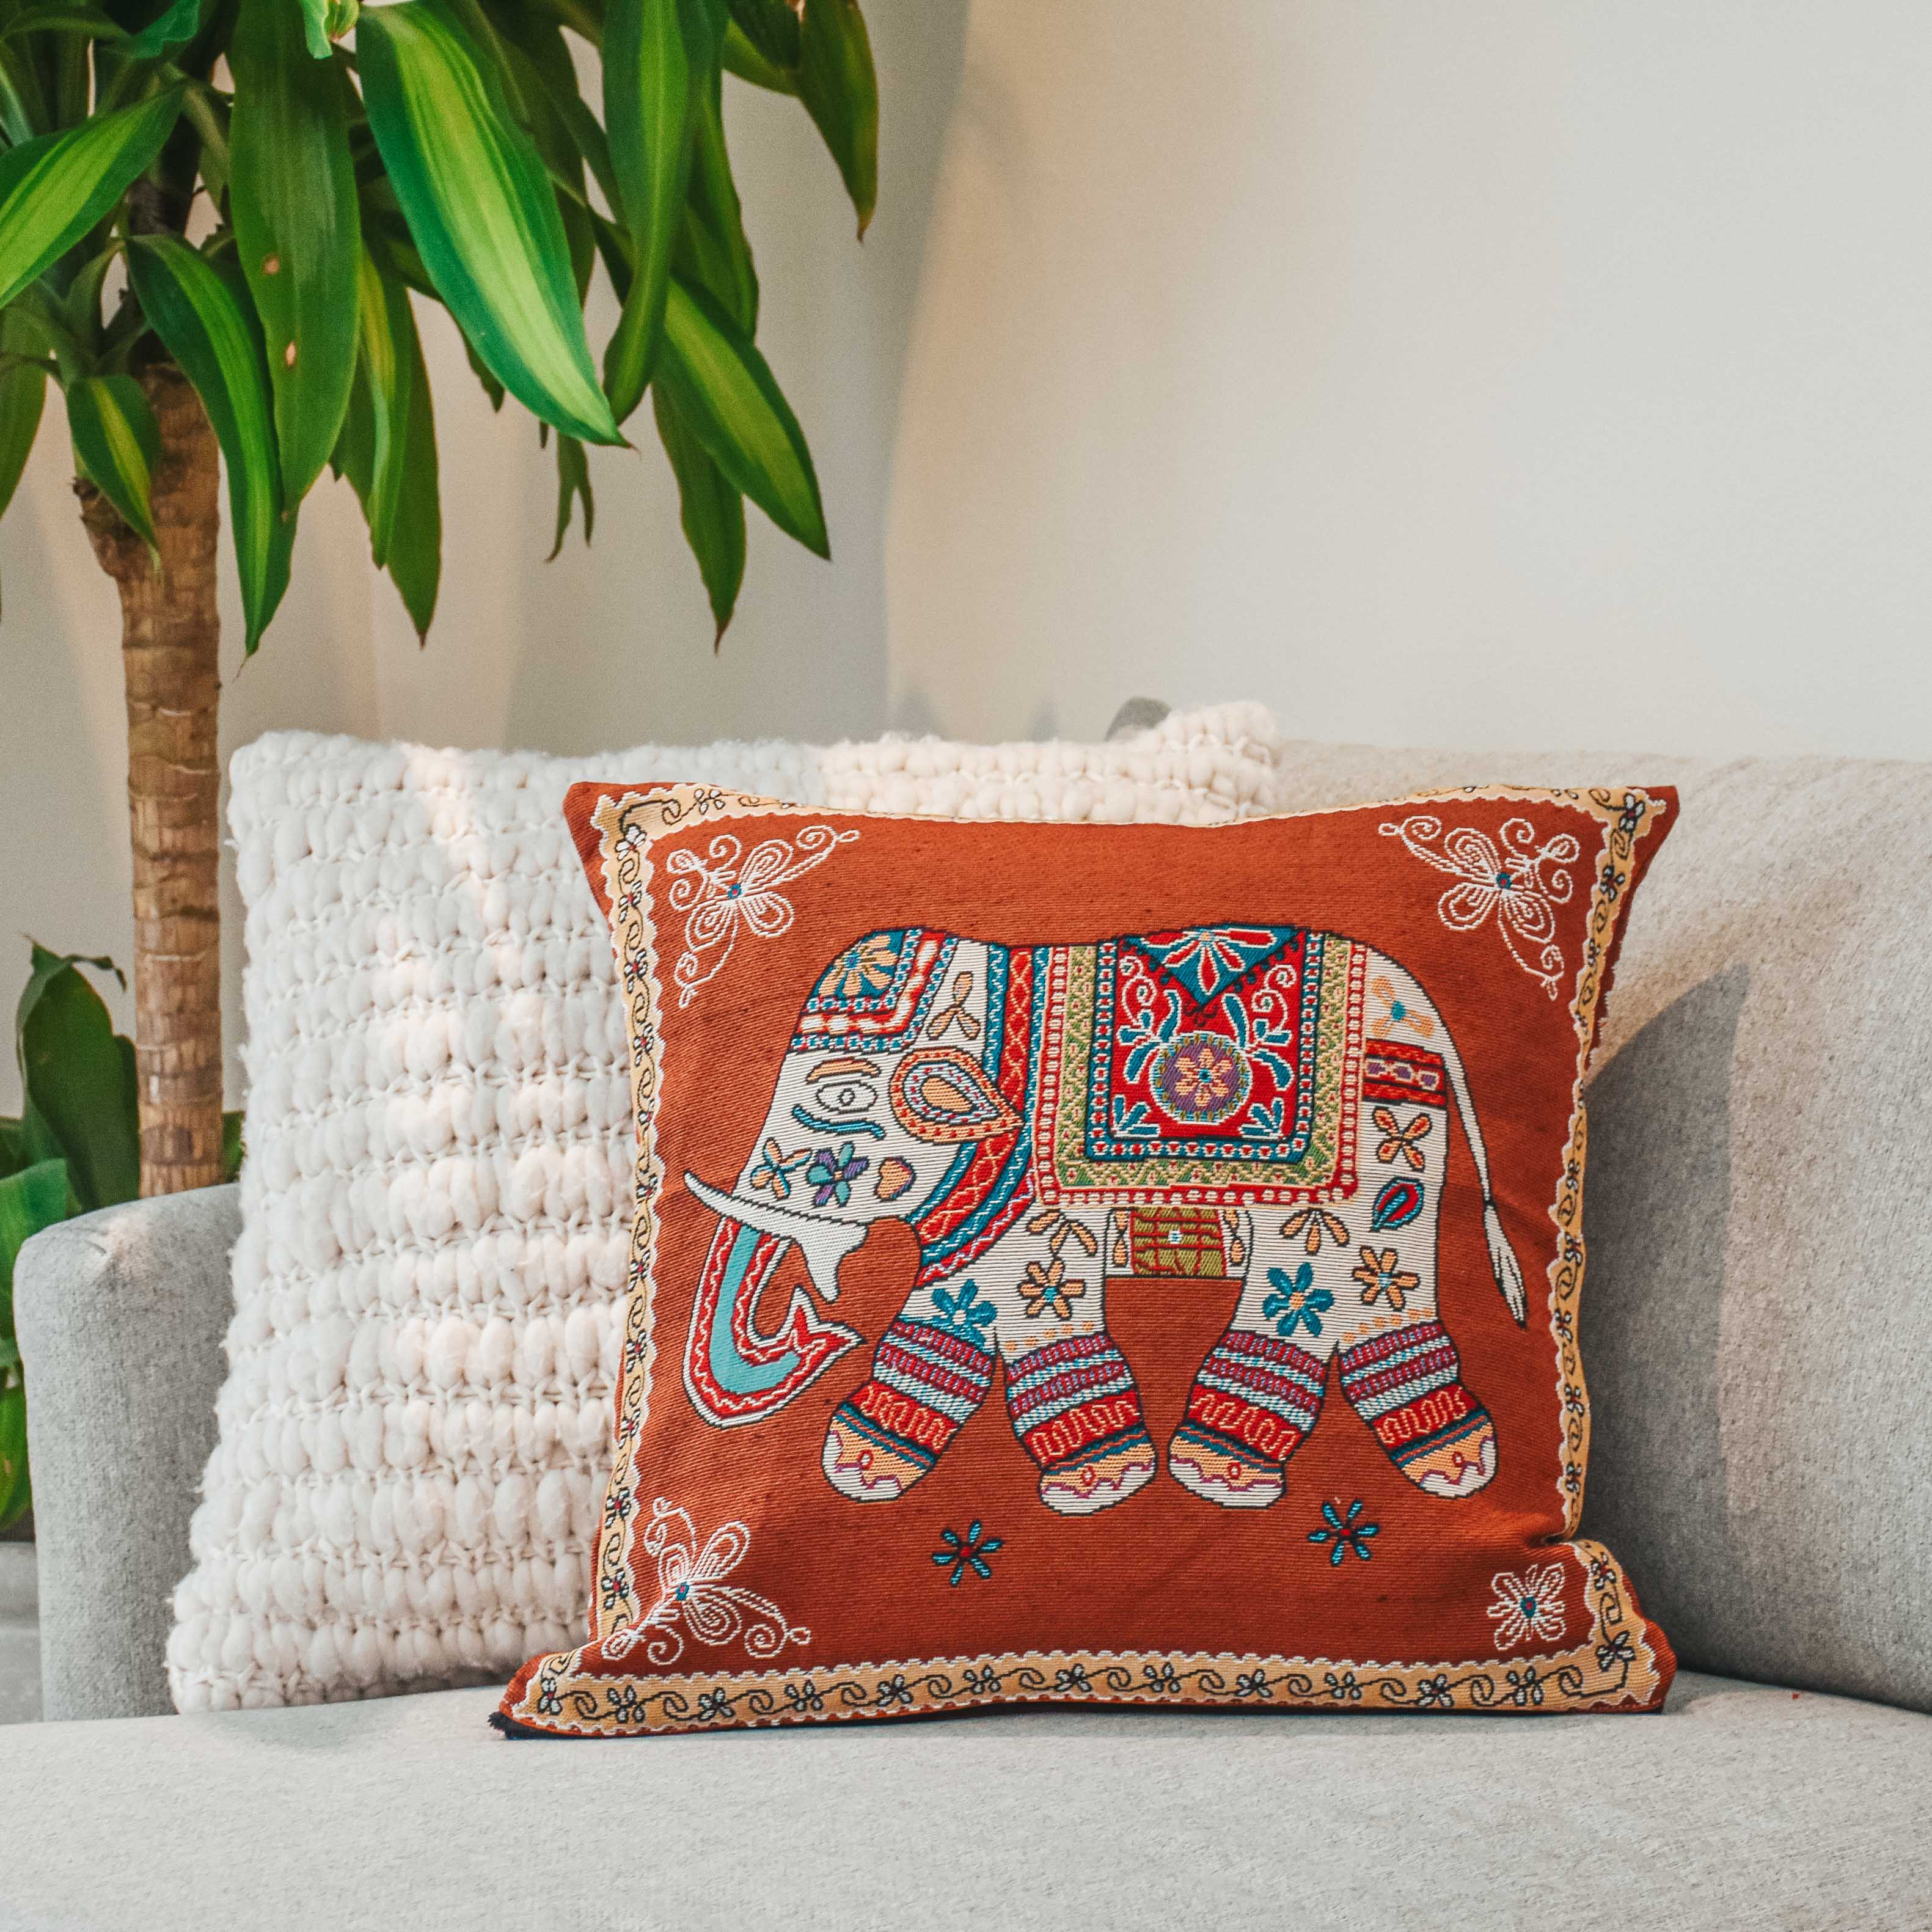 JAIPUR PILLOW COVER Elepanta Pillows - Buy Today Elephant Pants Jewelry And Bohemian Clothes Handmade In Thailand Help To Save The Elephants FairTrade And Vegan